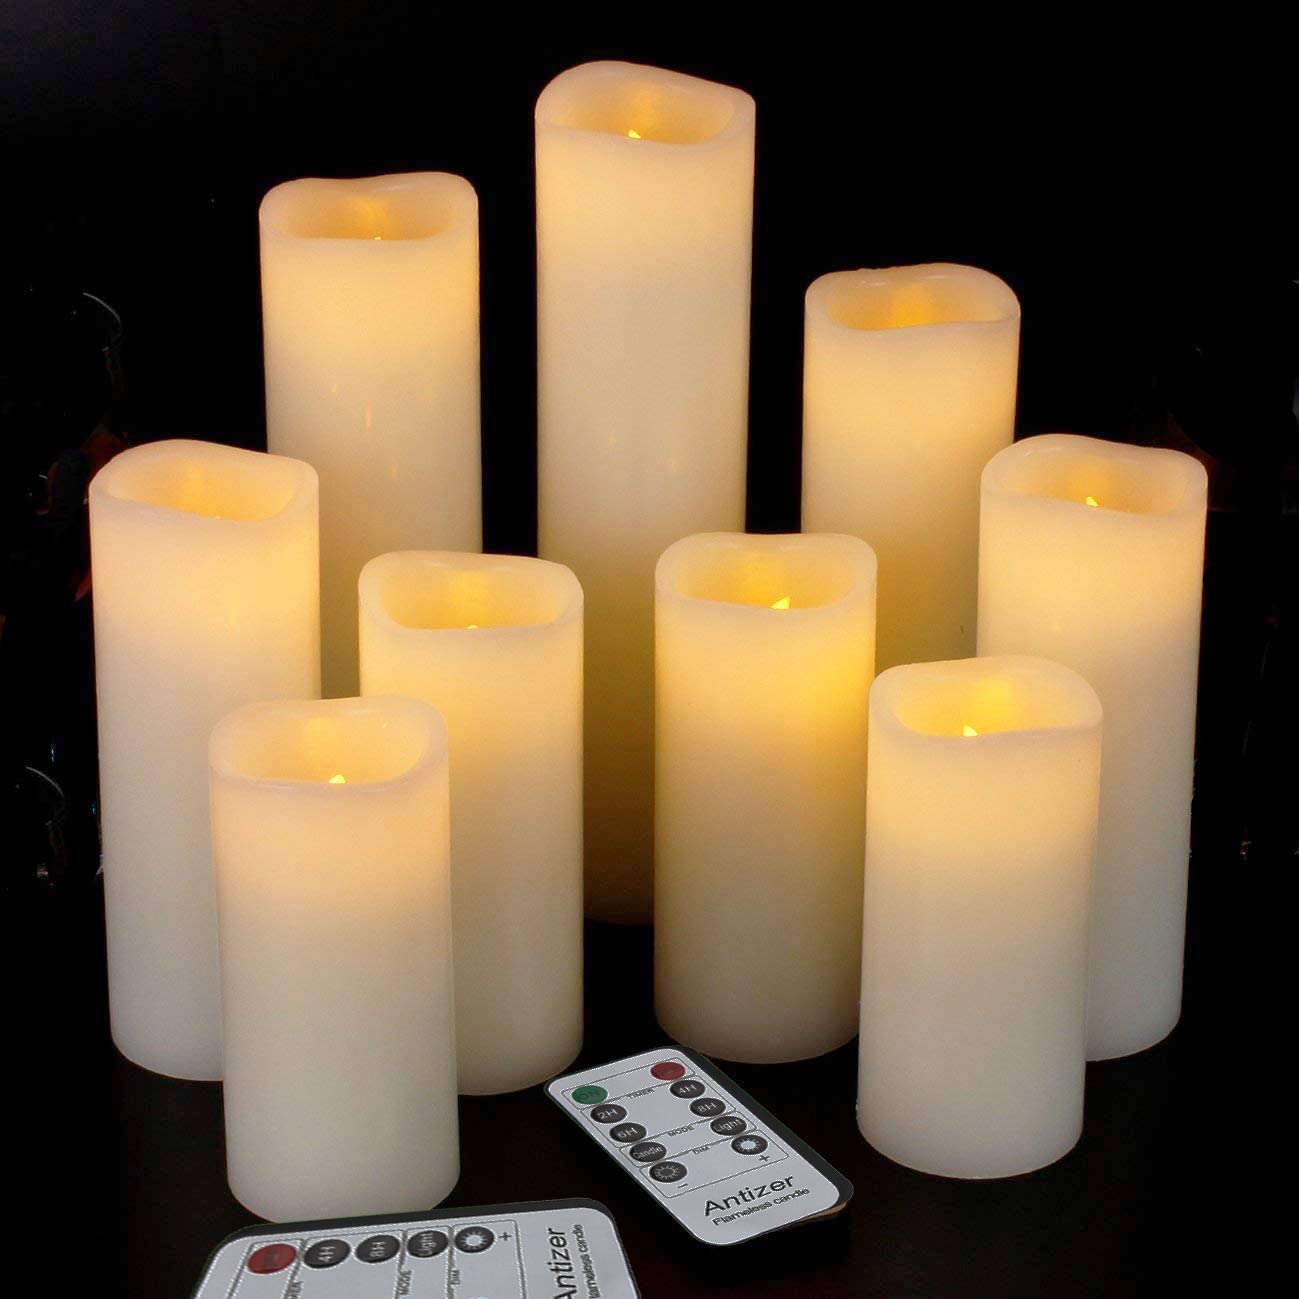 Antizer Flameless Candles Led Candles Pack of 9 (H 4" 5" 6" 7" 8" 9" x D 2.2") Ivory Real Wax